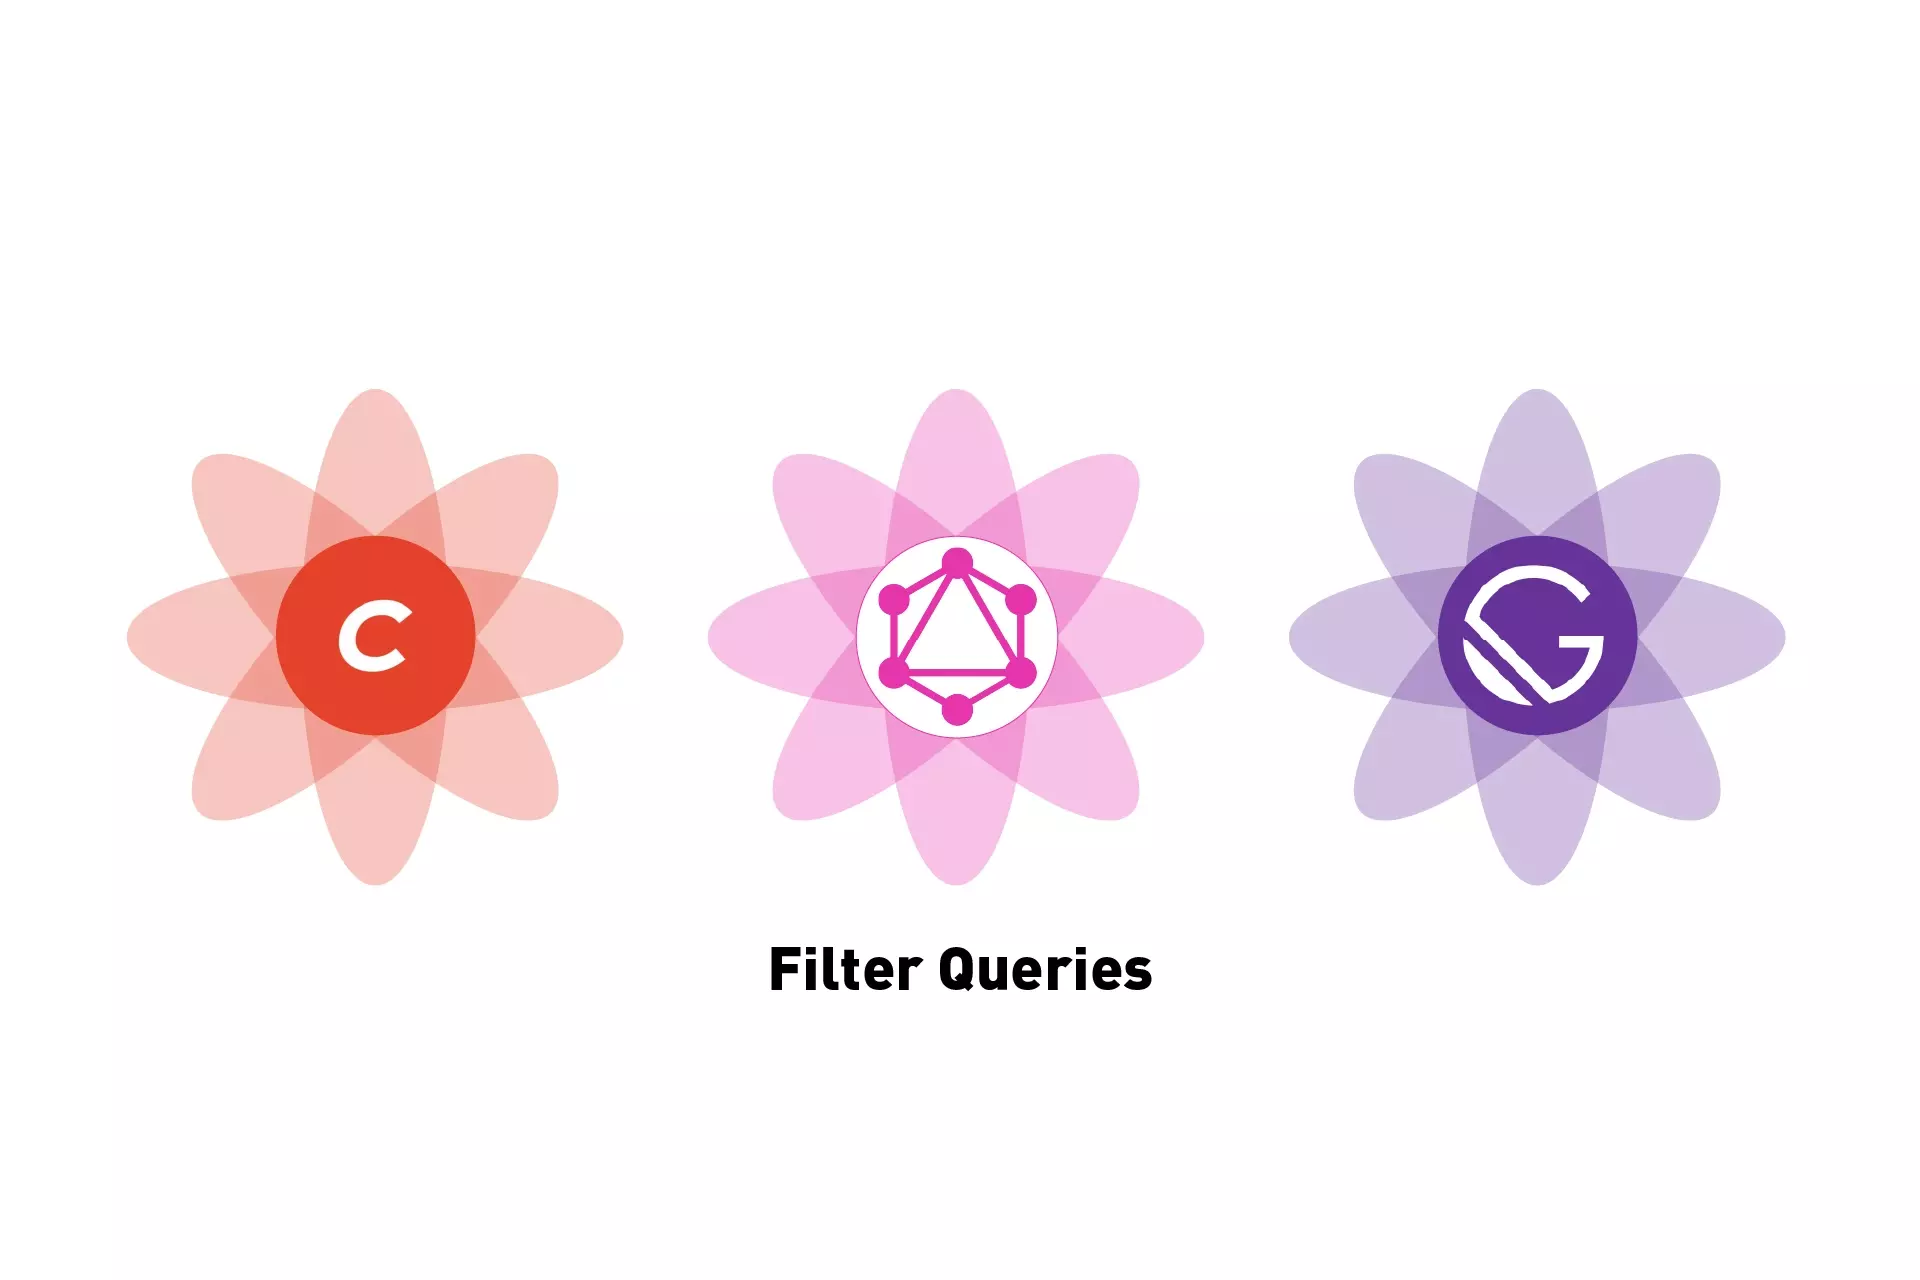 Three flowers that represent CraftCMS, GraphQL & GatsbyJS side by side. Beneath them sits the text "Filter Queries".